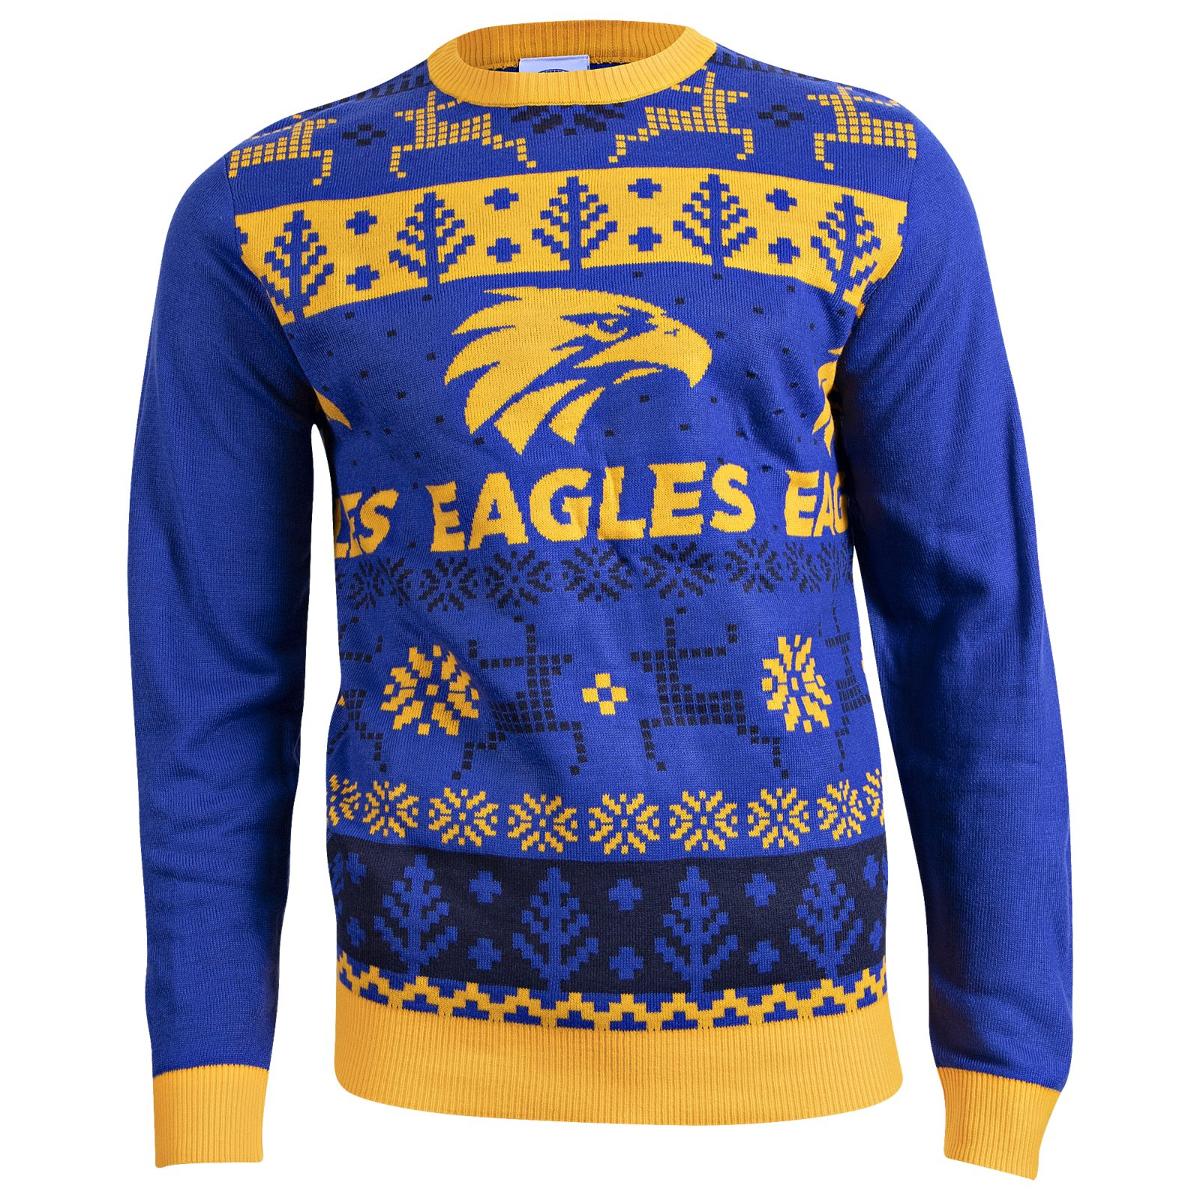 Collingwood Magpies Ugly Christmas Sweater Gift For Fans